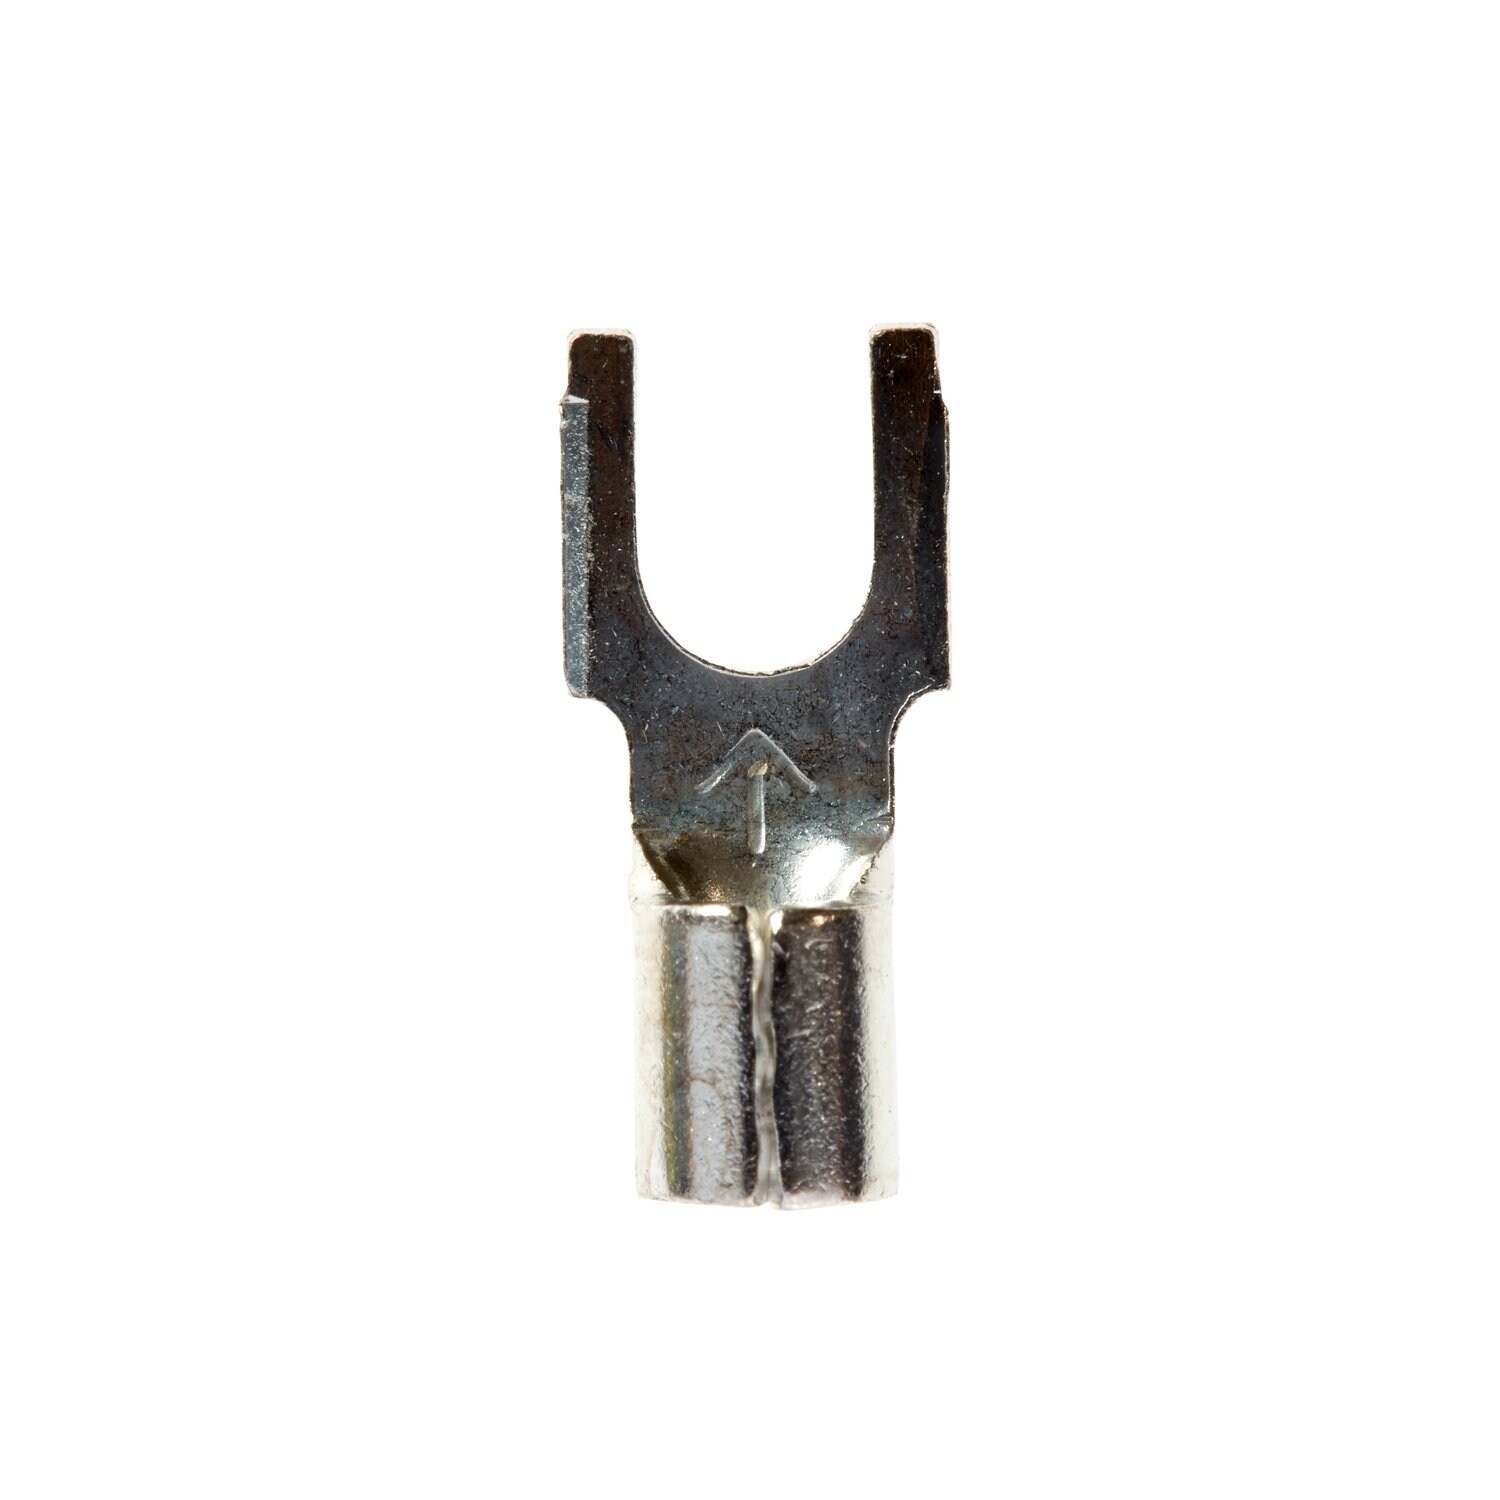 7100164109 - 3M Scotchlok Block Fork, Non-Insulated Butted Seam MU10-10FBK, Stud
Size 10, suitable for use in a terminal block, 500/Case